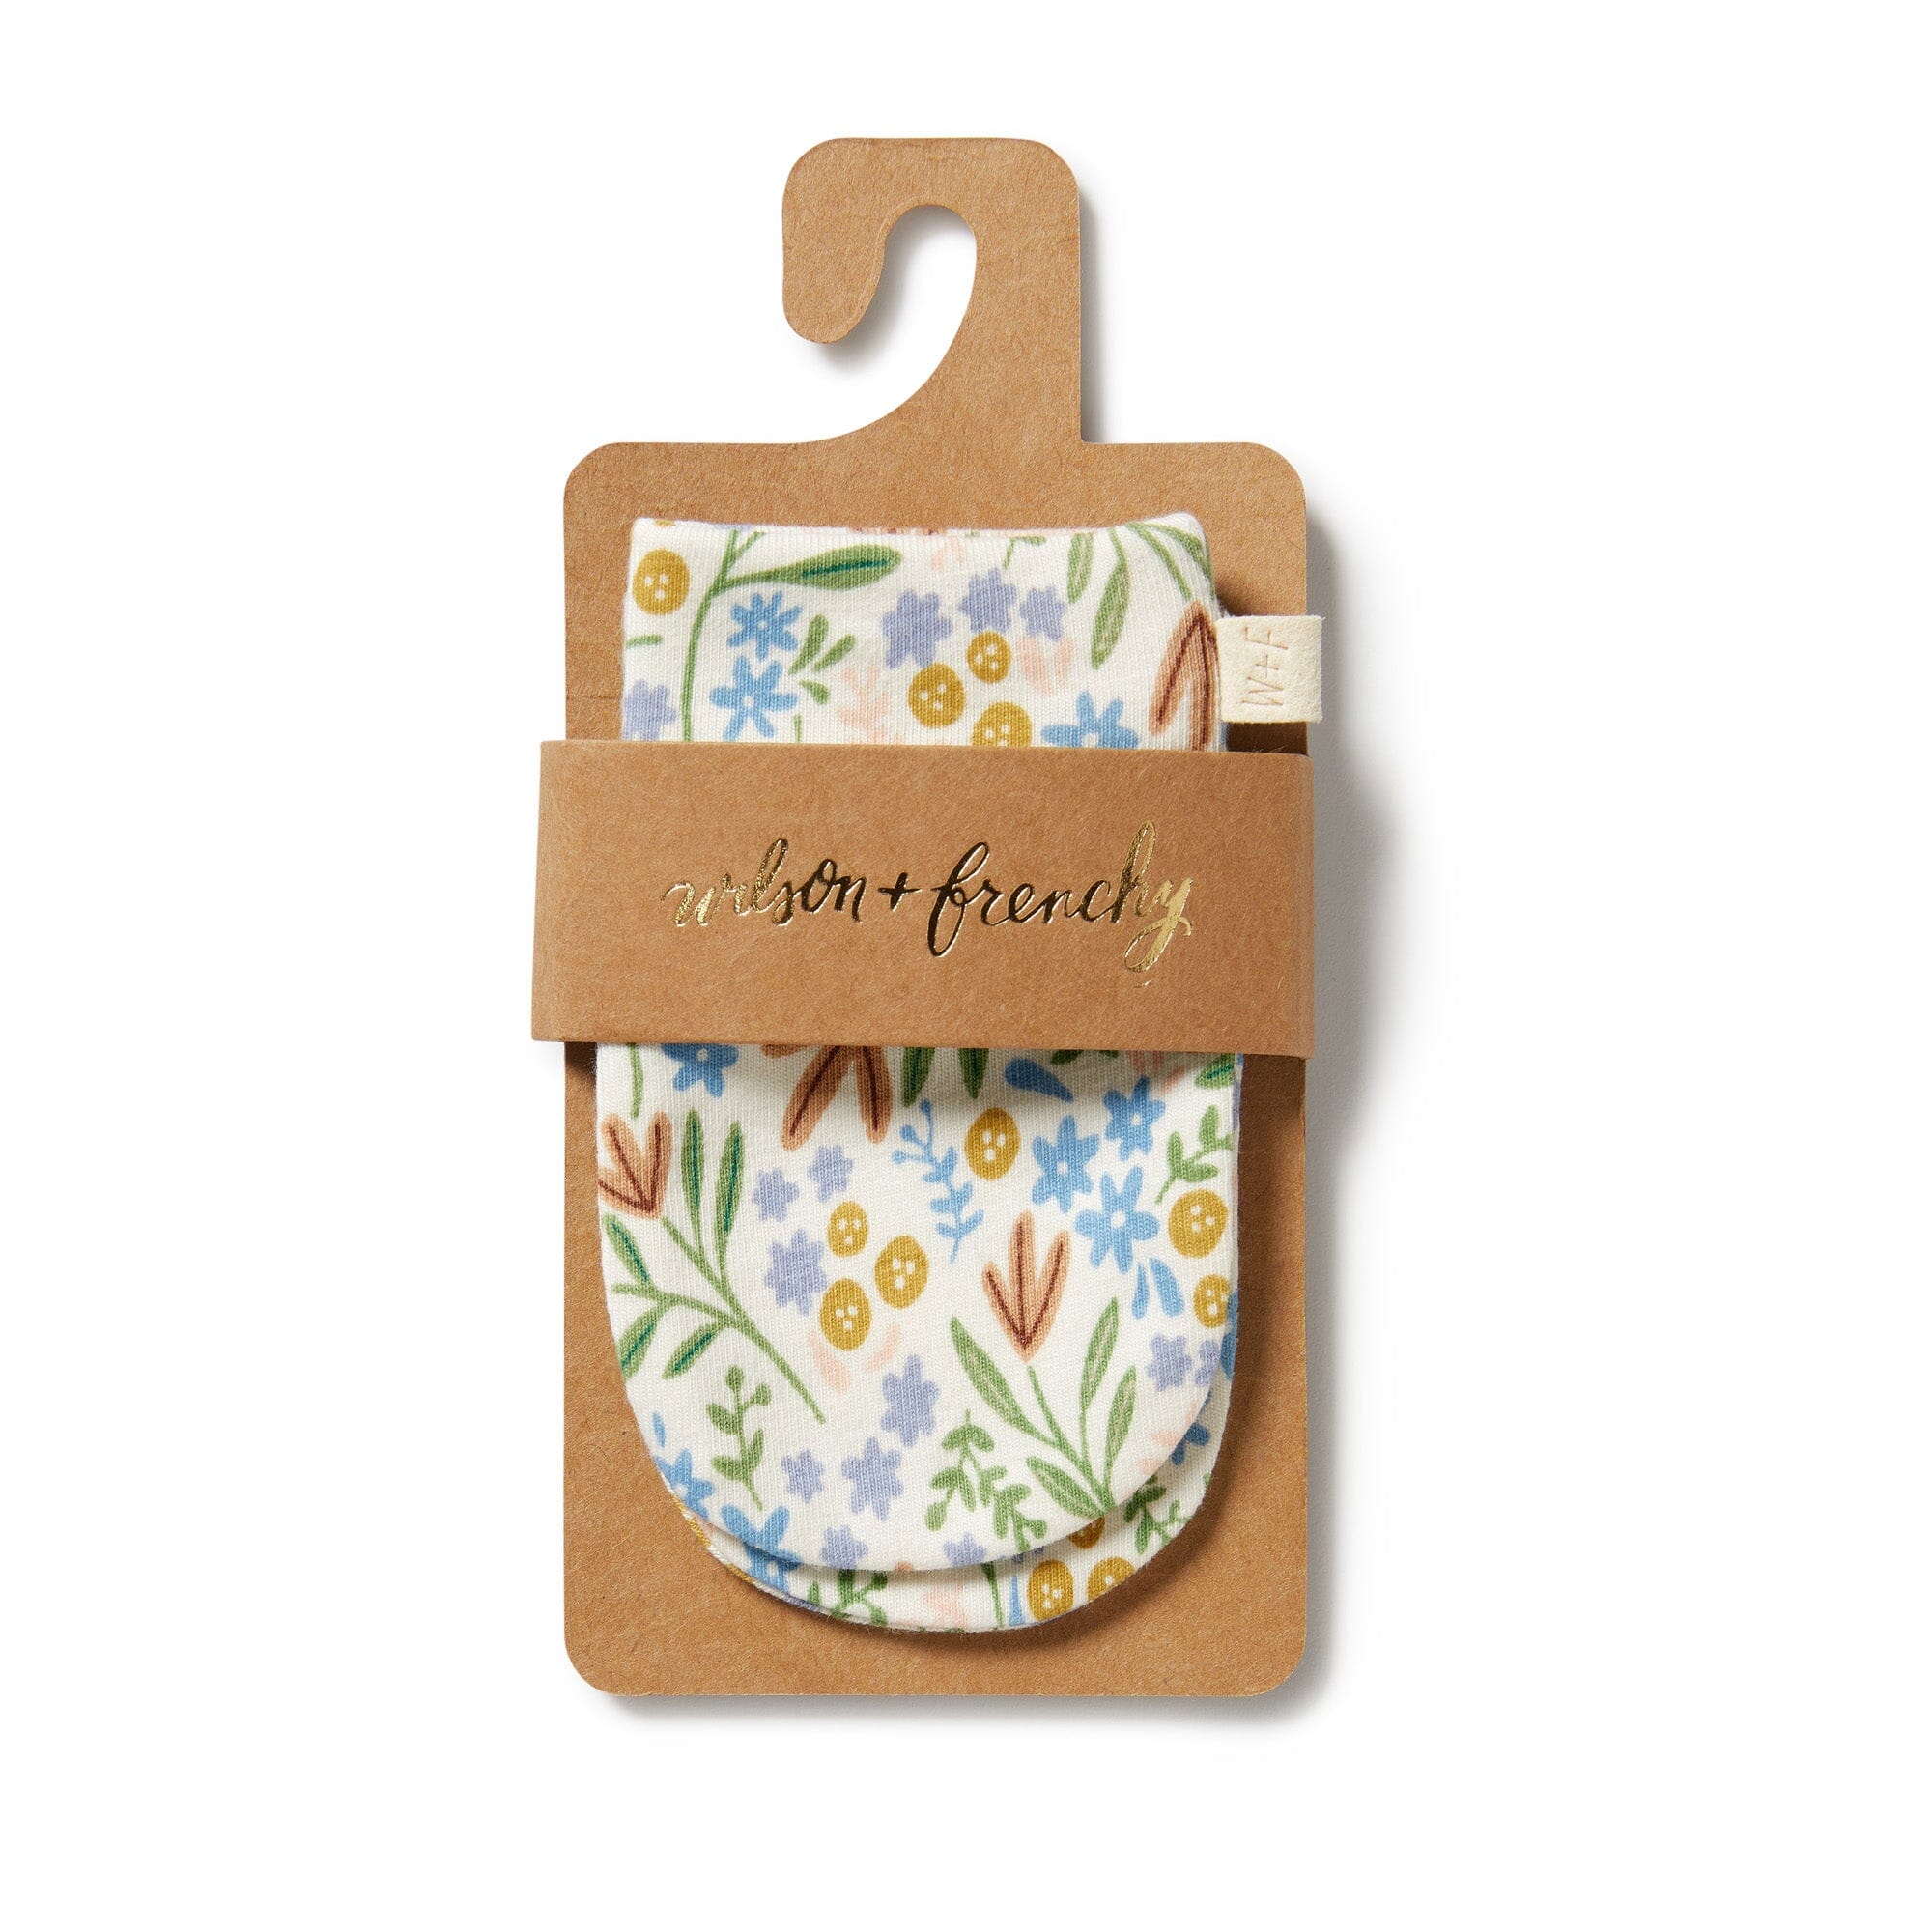 Wilson & Frenchy - Organic Mittens - Tinker Floral Baby Wilson & Frenchy